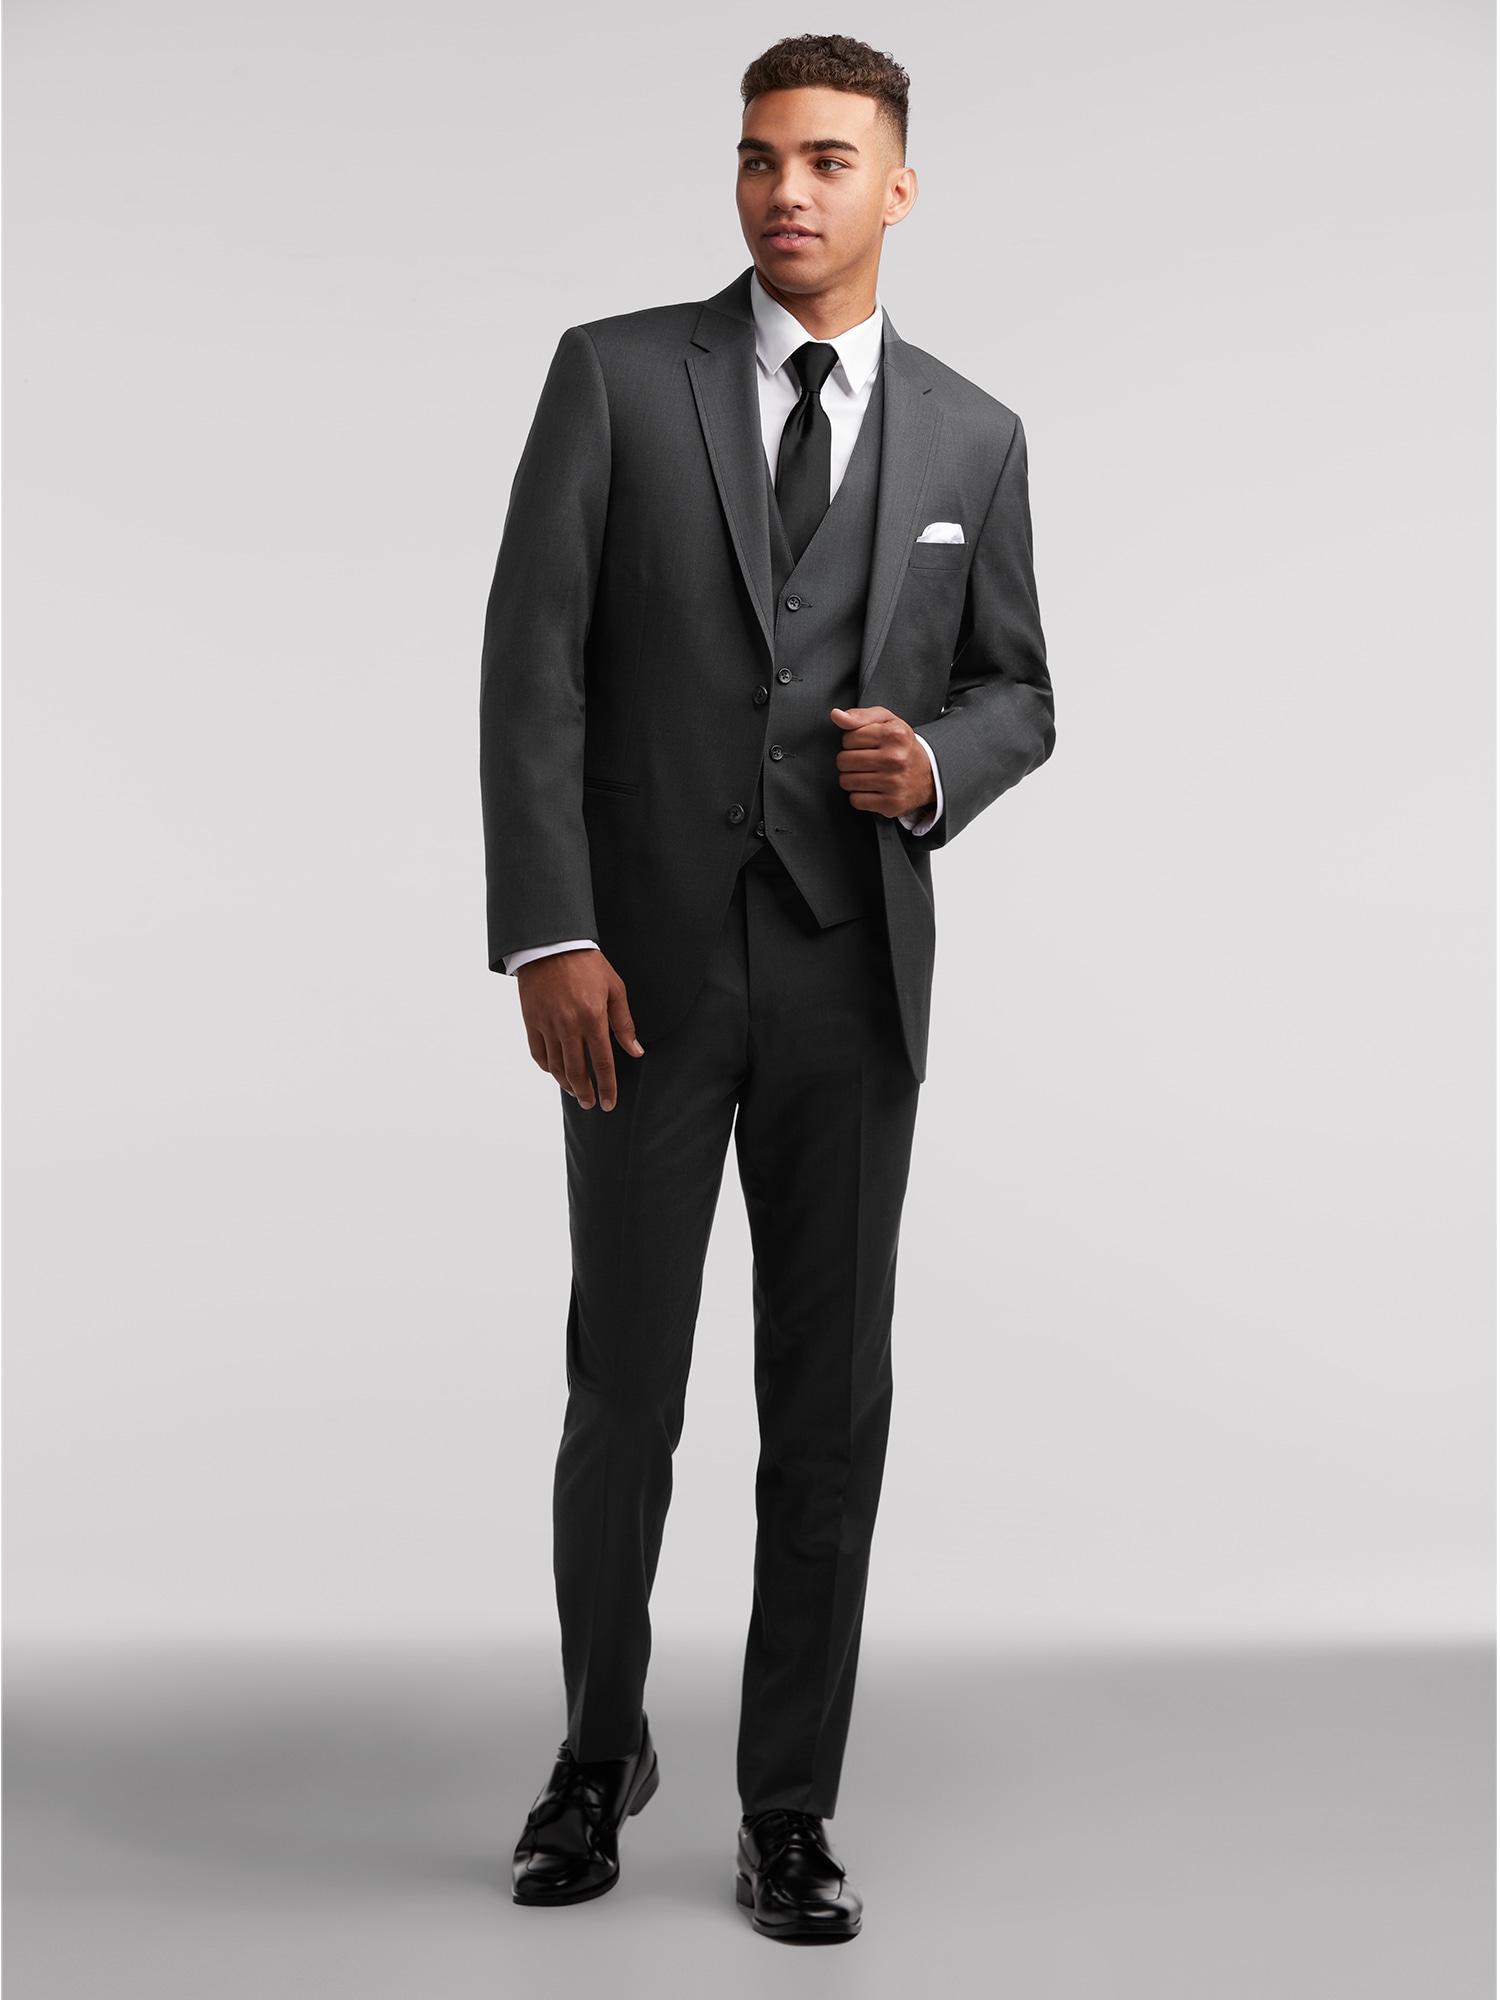 Formal Suits, Men's Formal Packages Starting at $269.99